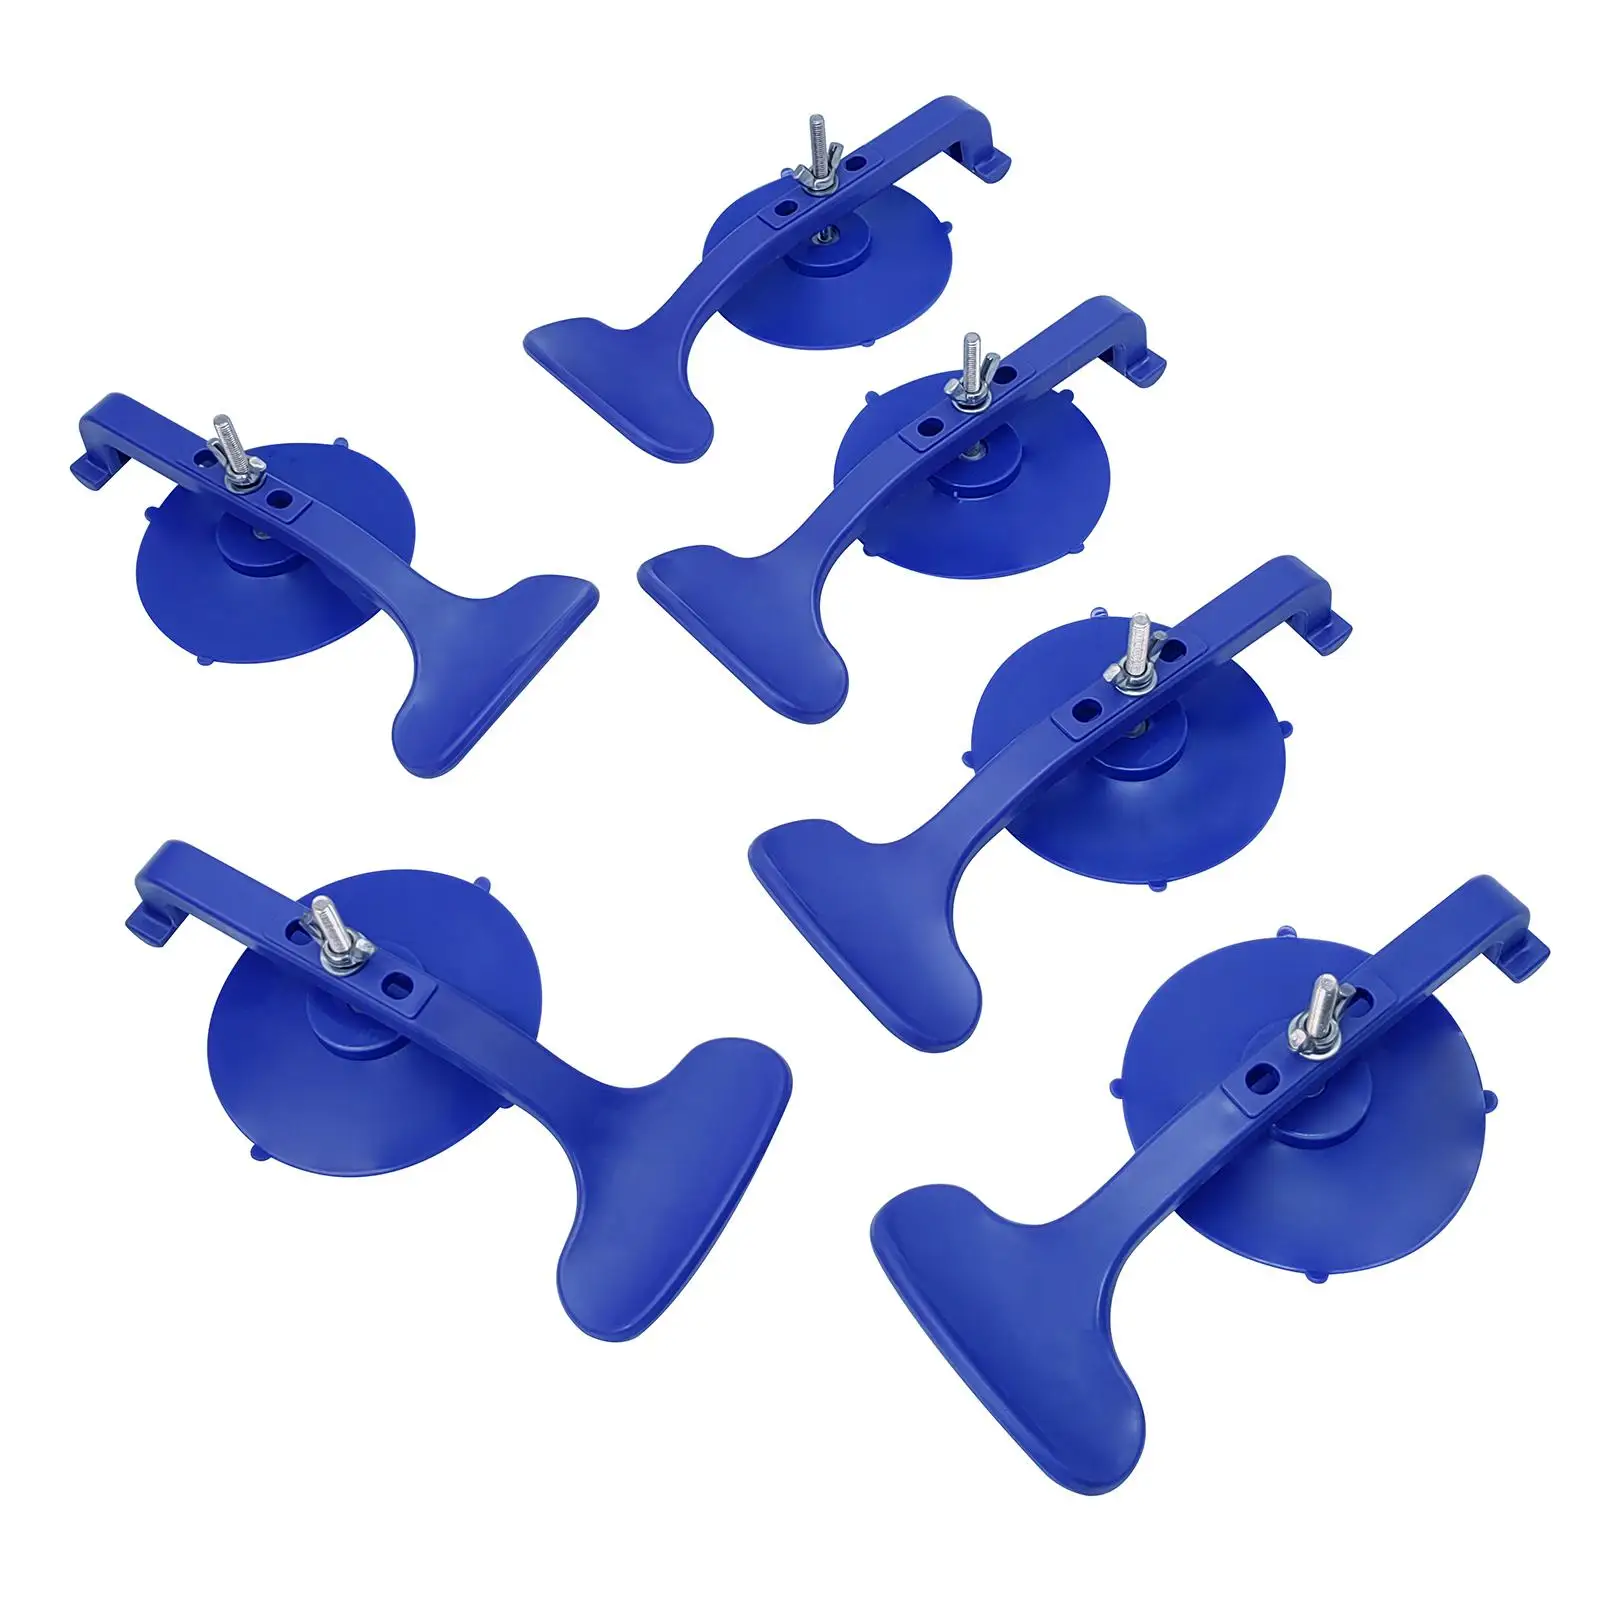 6x High Performance Suction Clamp Set for Convertible Glass Windshield